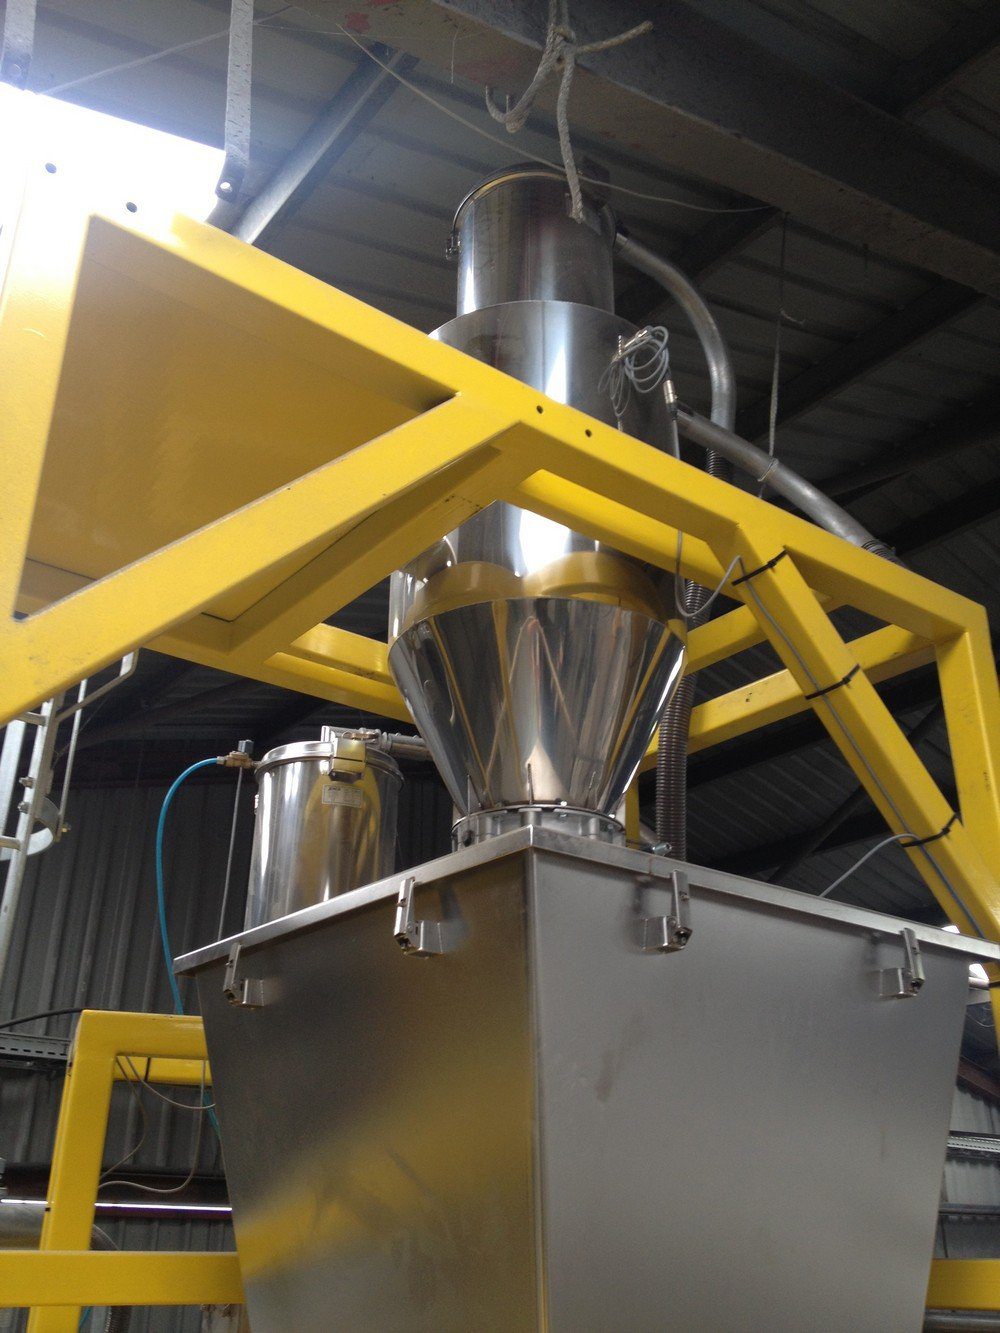 Suppliers Of Vacuum Conveyors For The Nutraceutical Industry